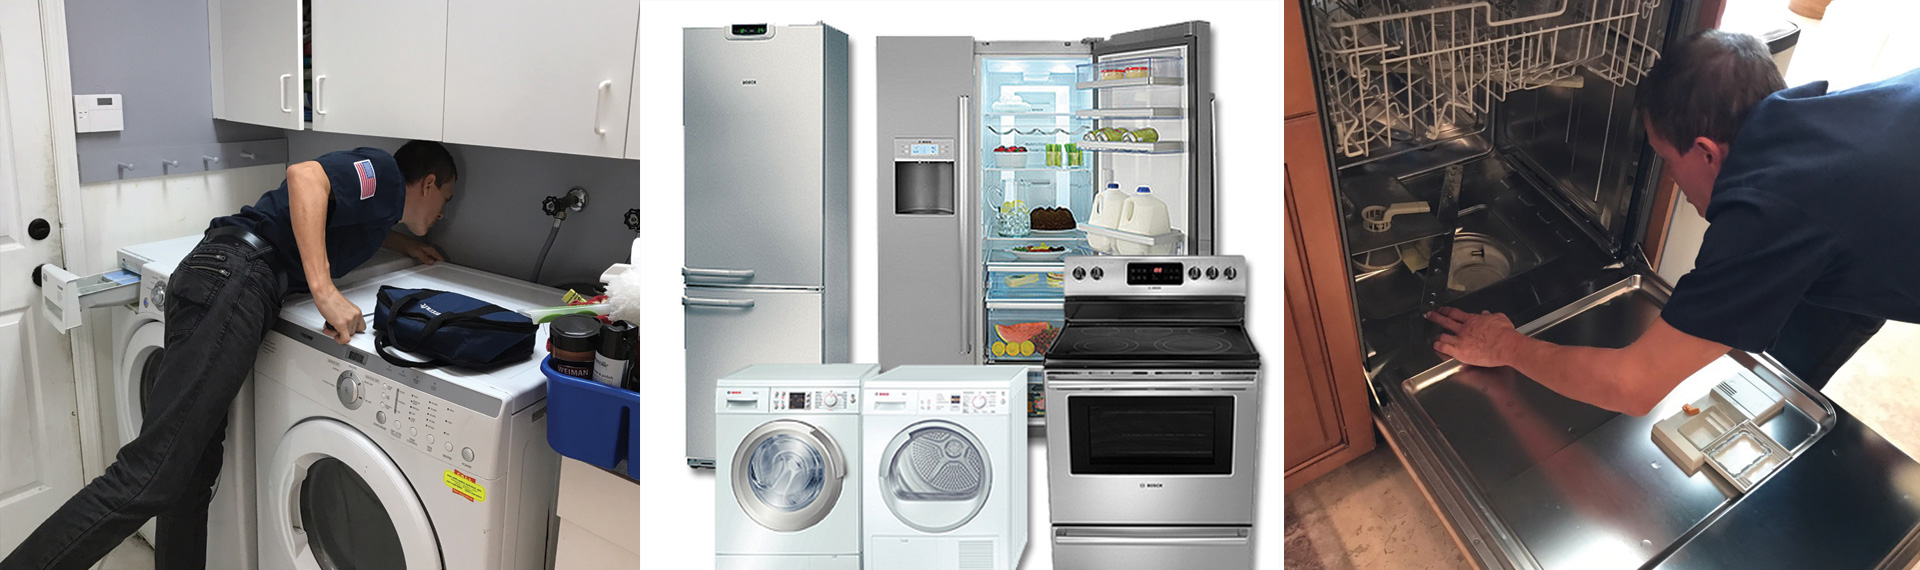 1A Appliance Service Coral Springs FL